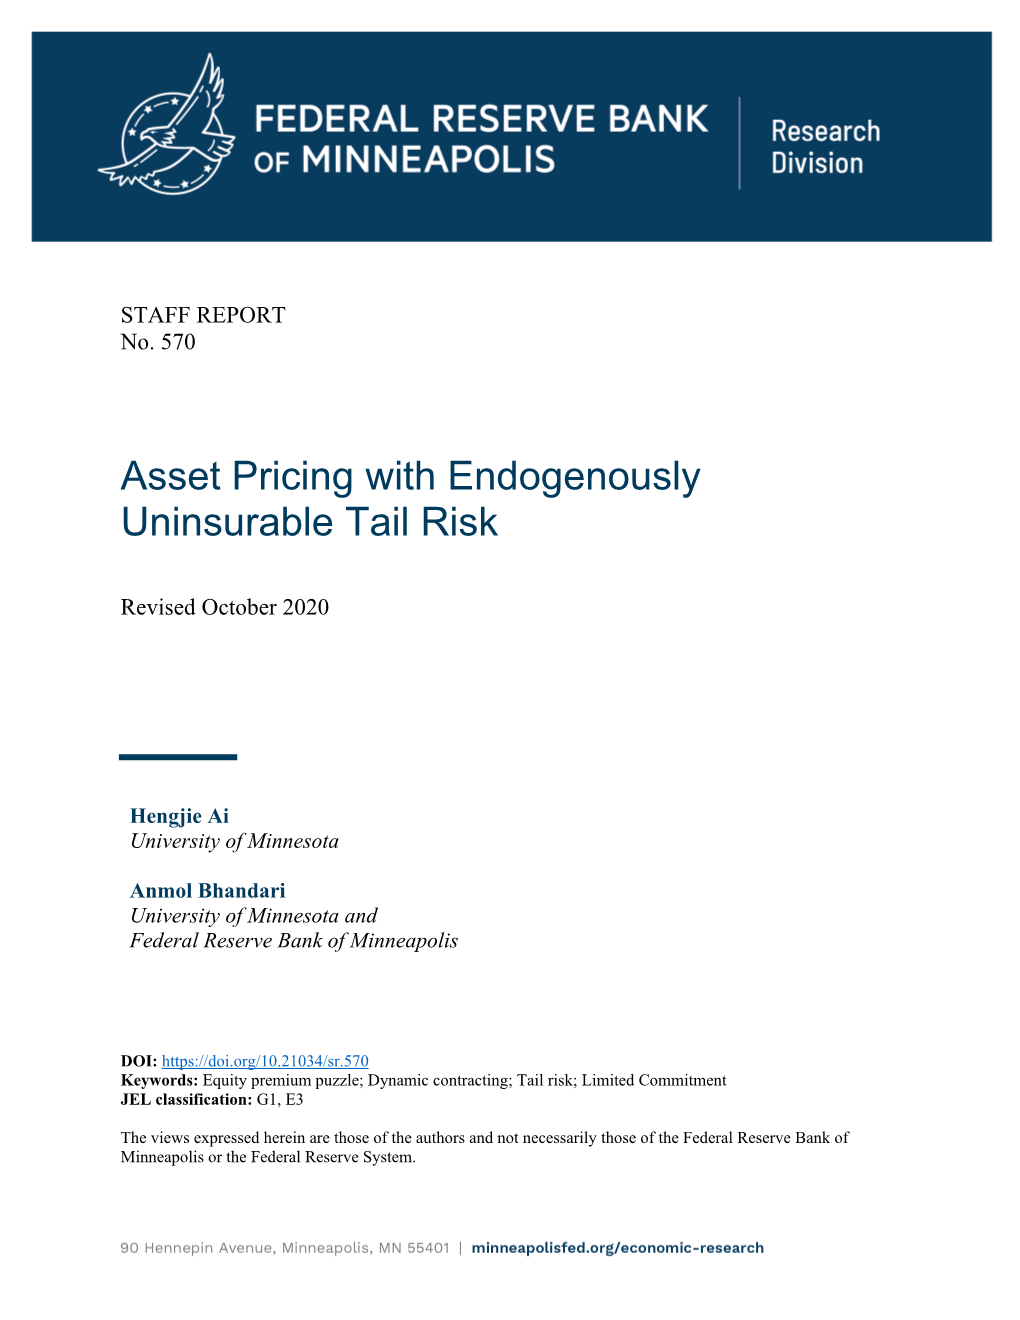 Asset Pricing with Endogenously Uninsurable Tail Risk